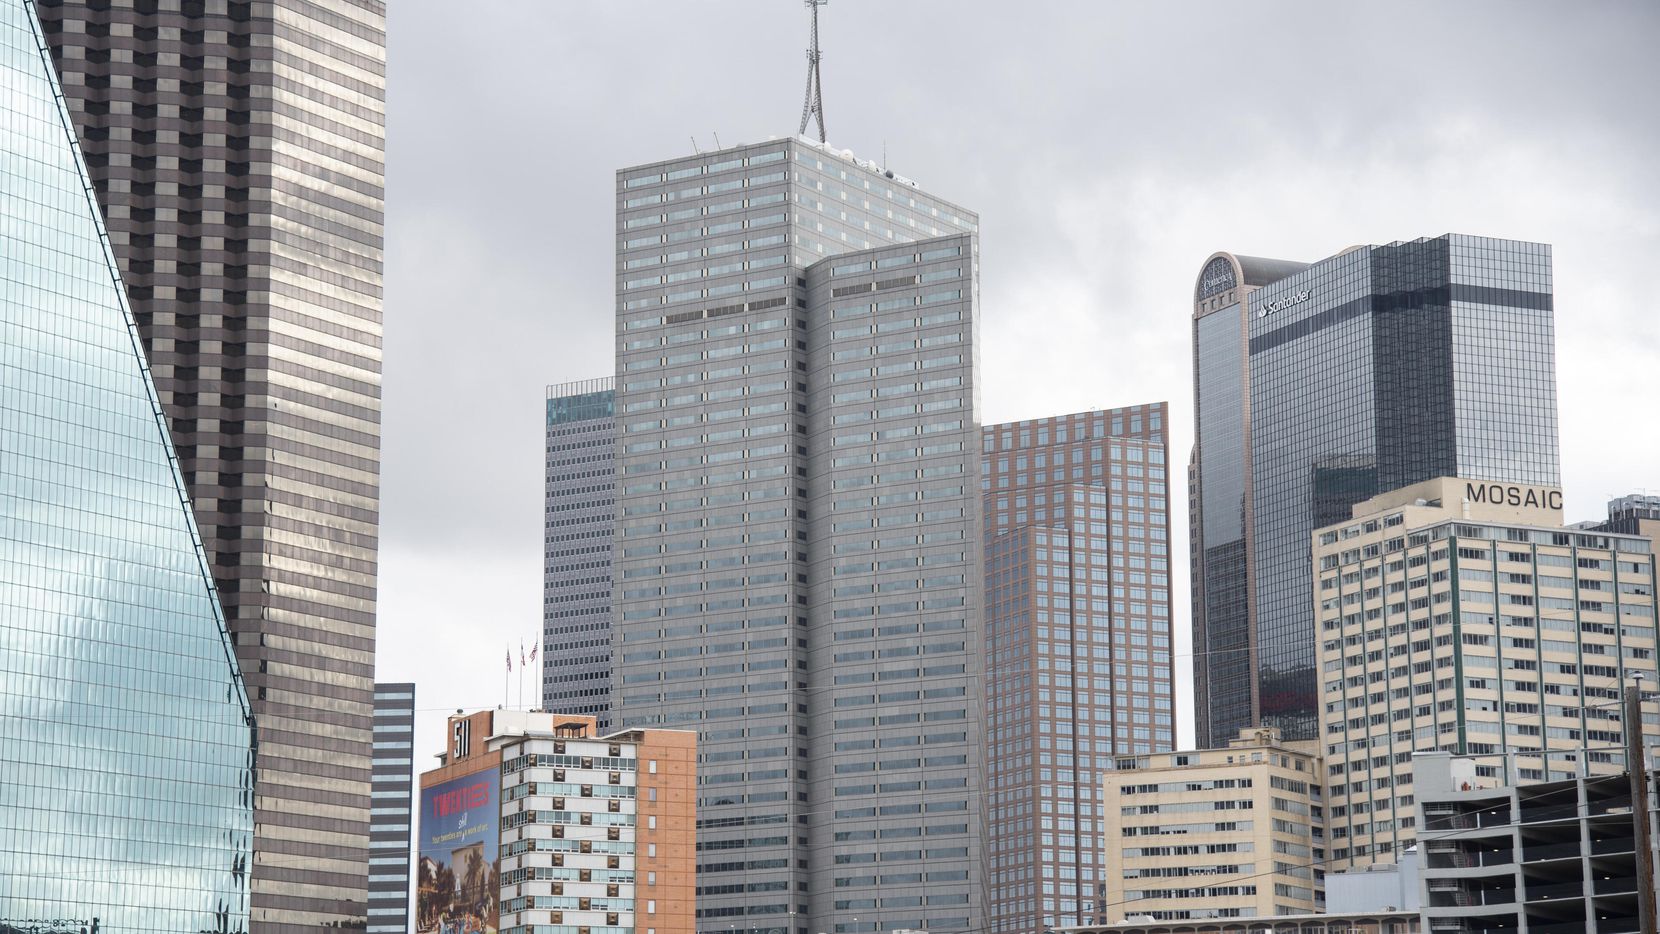 Energy Plaza Tower in downtown Dallas, Texas on Wednesday, December 15, 2021.